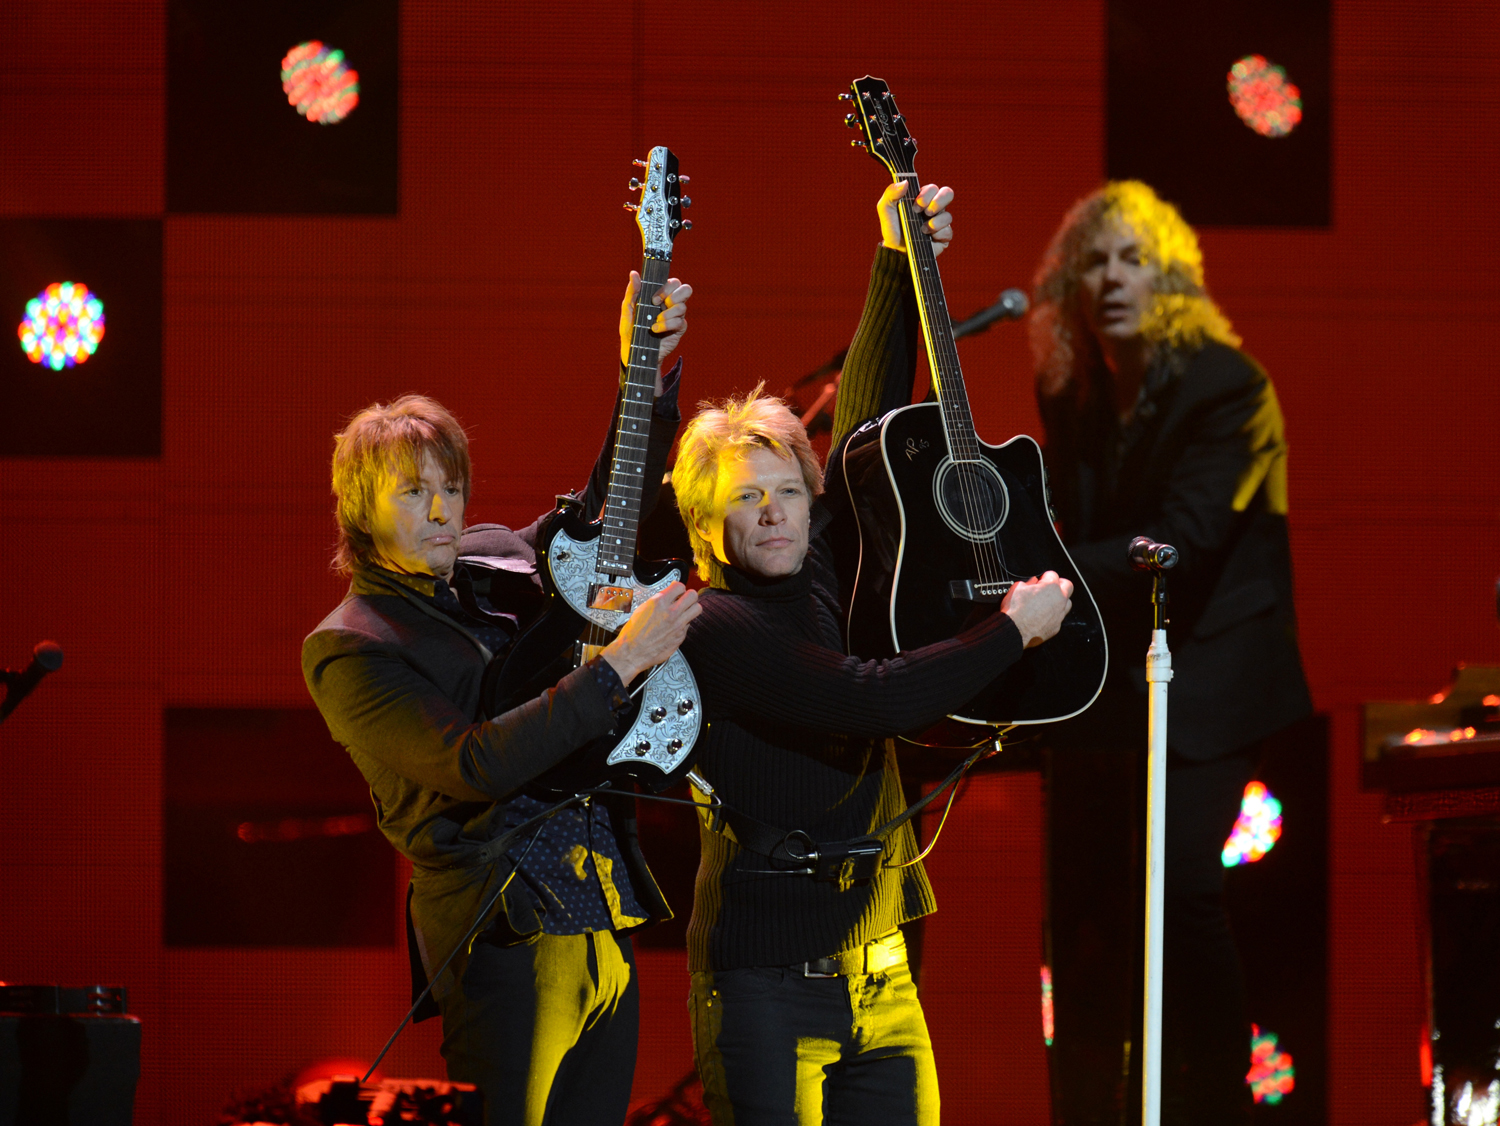 Jon Bon Jovi (R) performs during "12-12-12" a concert benefiting the victims of Hurricane Sandy